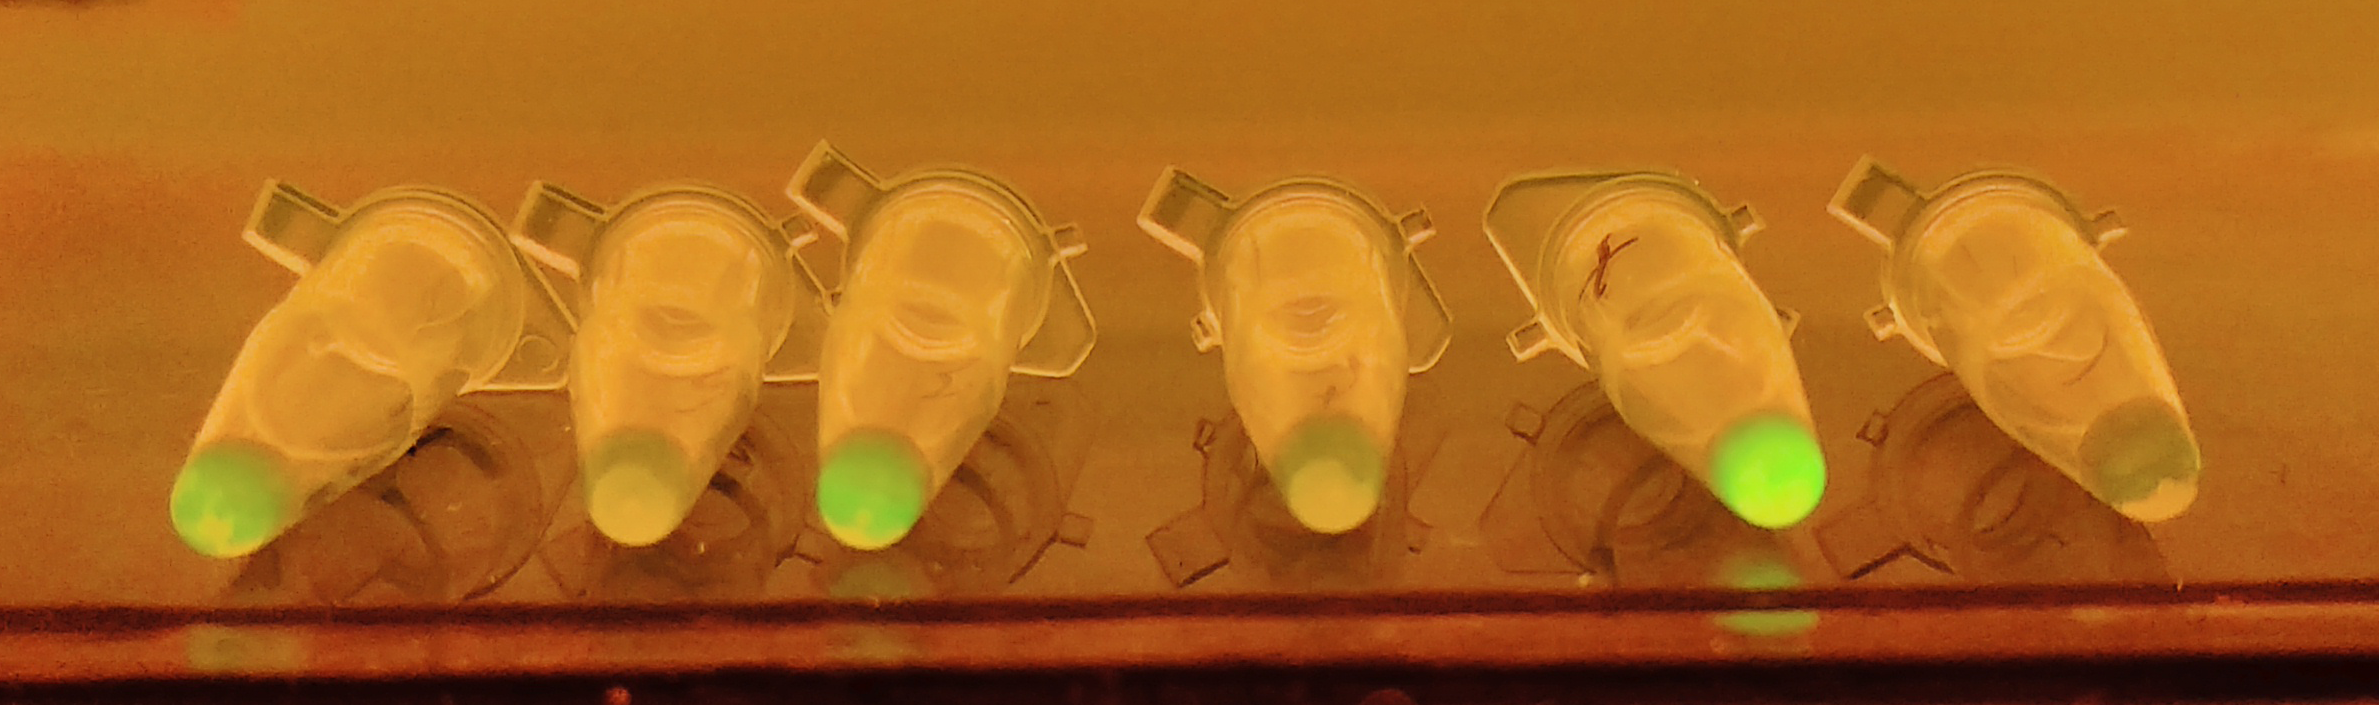 NAND Gate: Pattern left to right should be ON, ON, ON, OFF. Last two tubes are positive and negative controls.